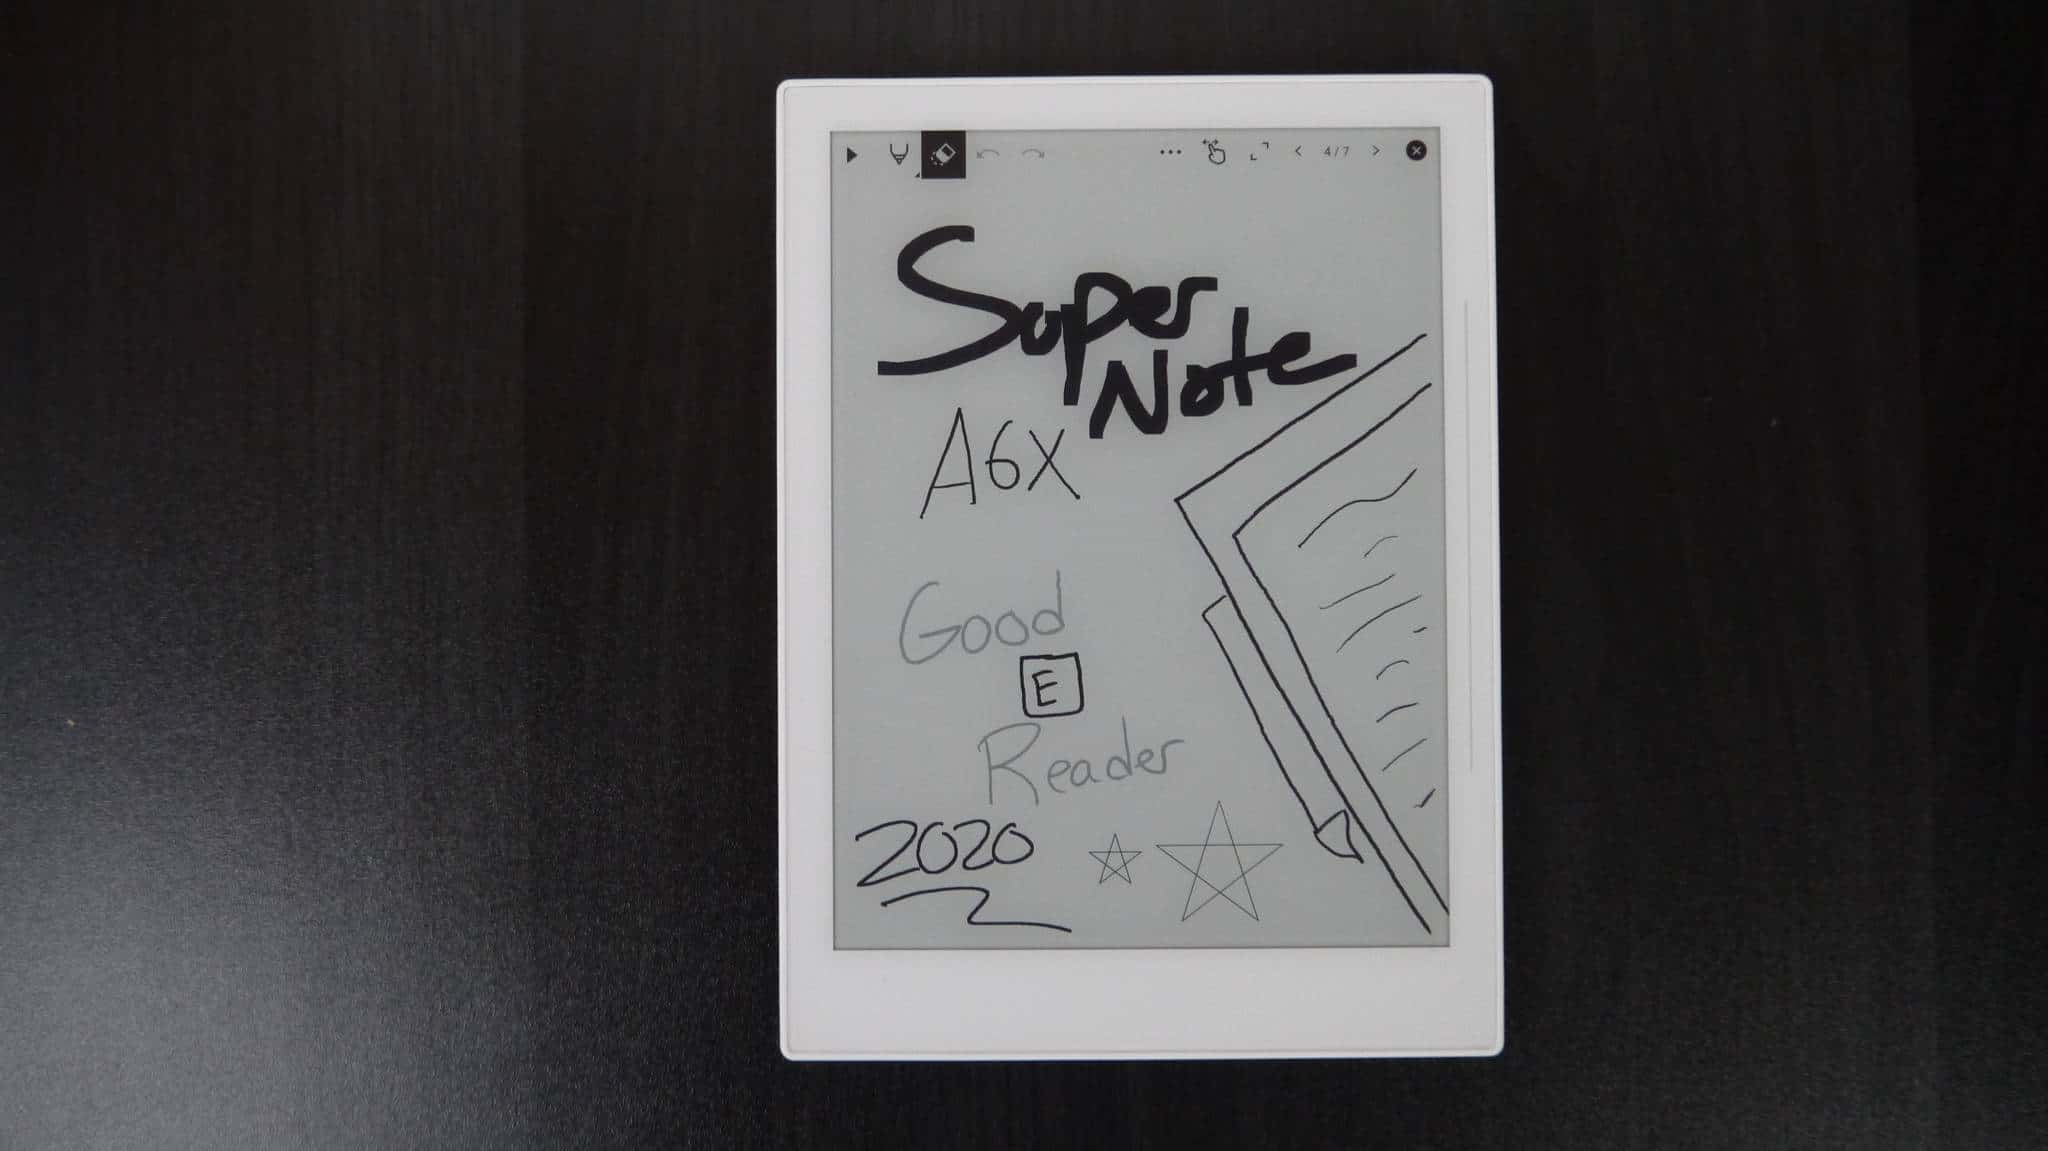 Supernote A6X